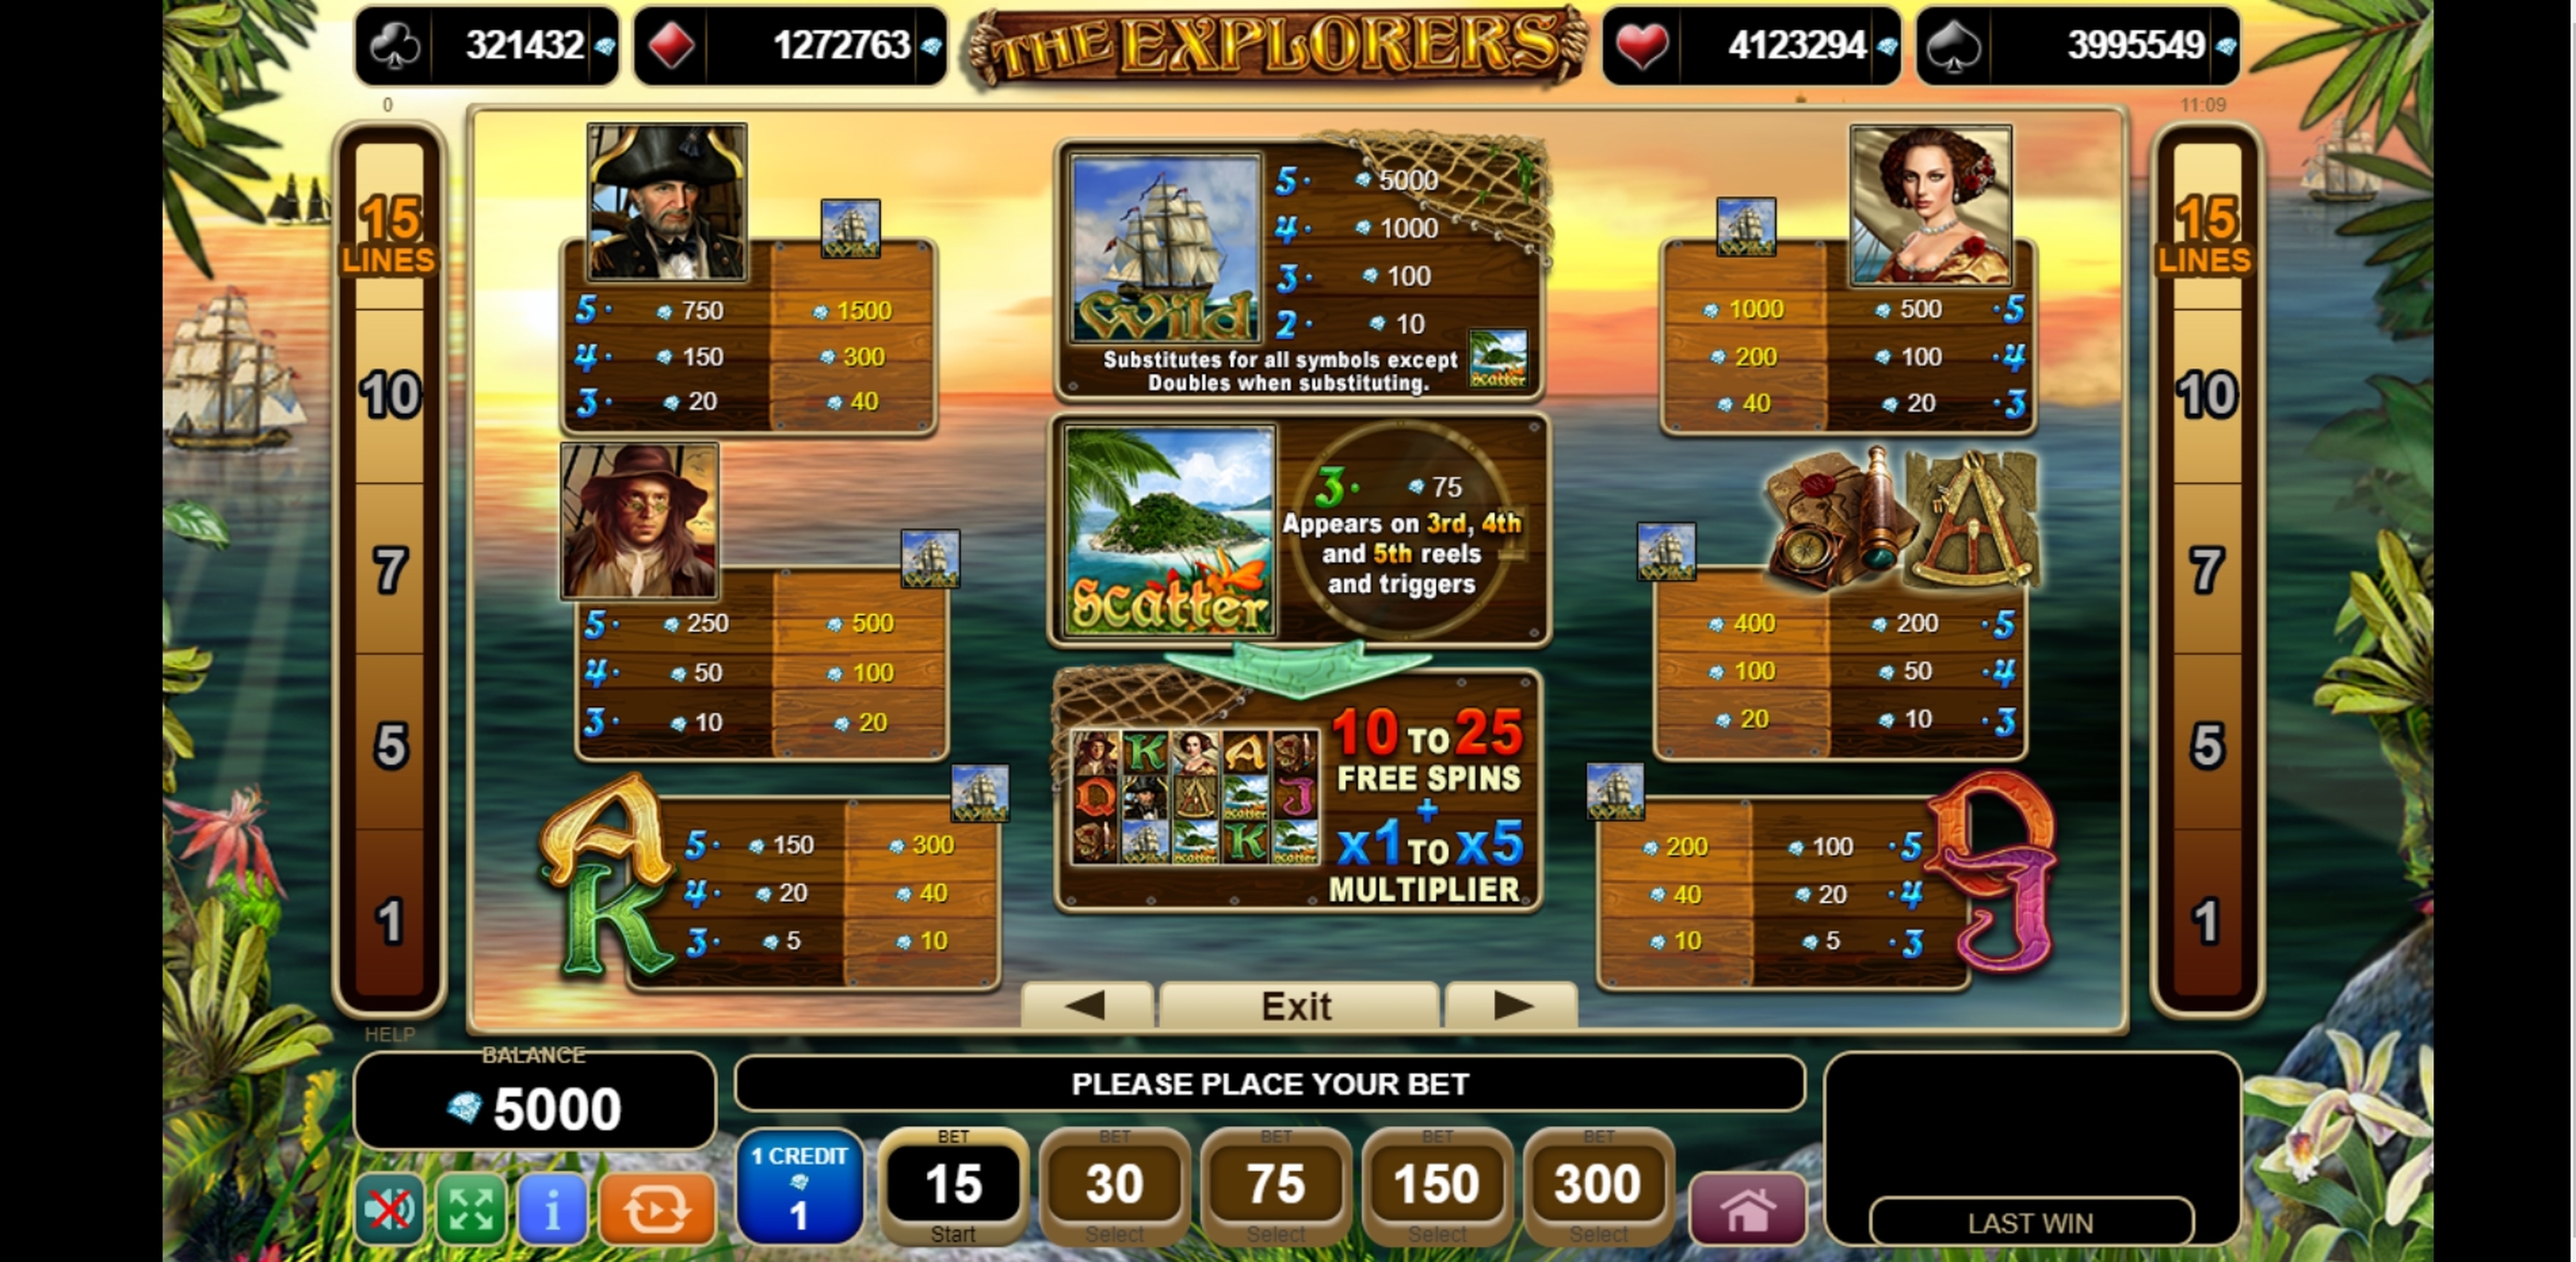 Info of The Explorers Slot Game by EGT